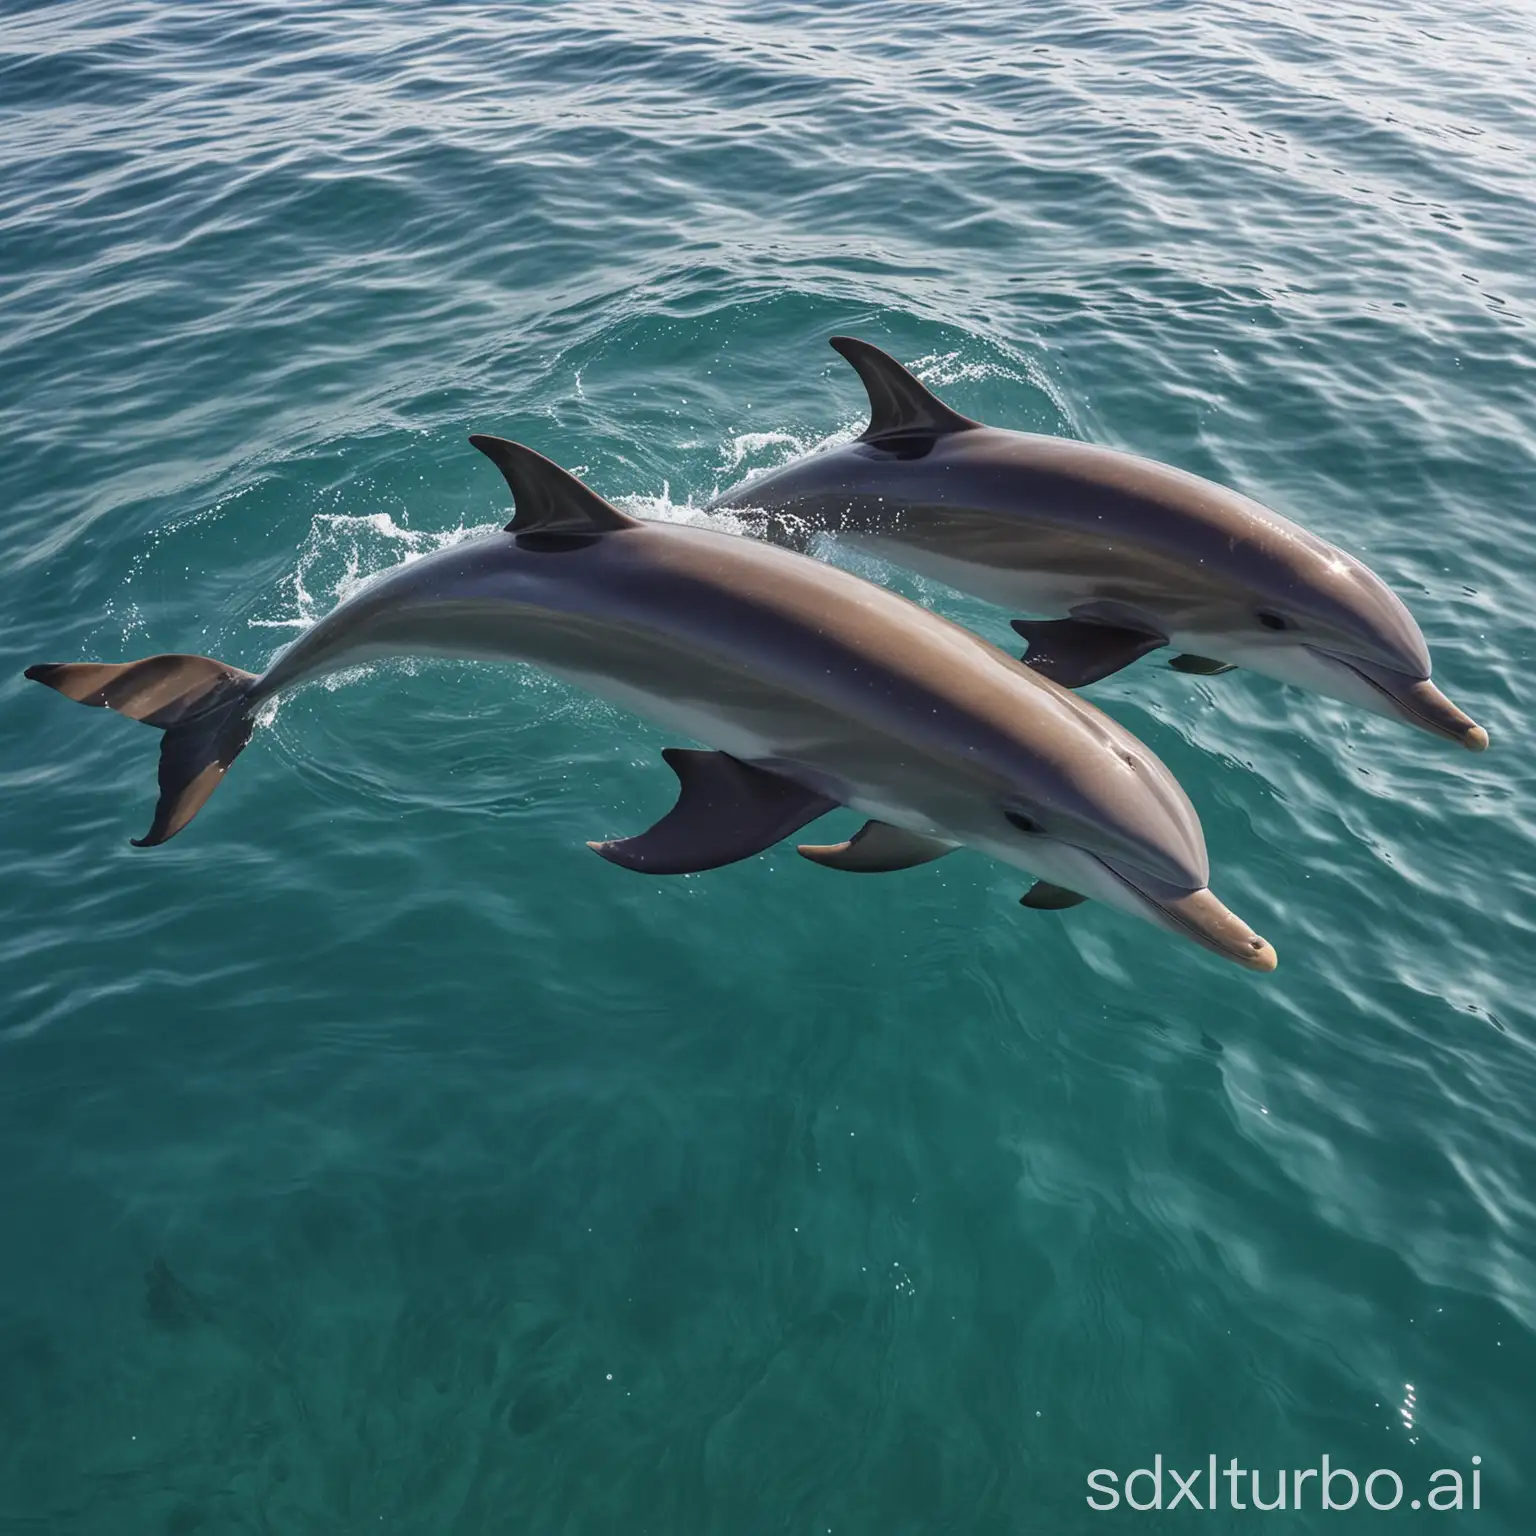 Graceful-Dolphins-Swimming-in-the-Ocean